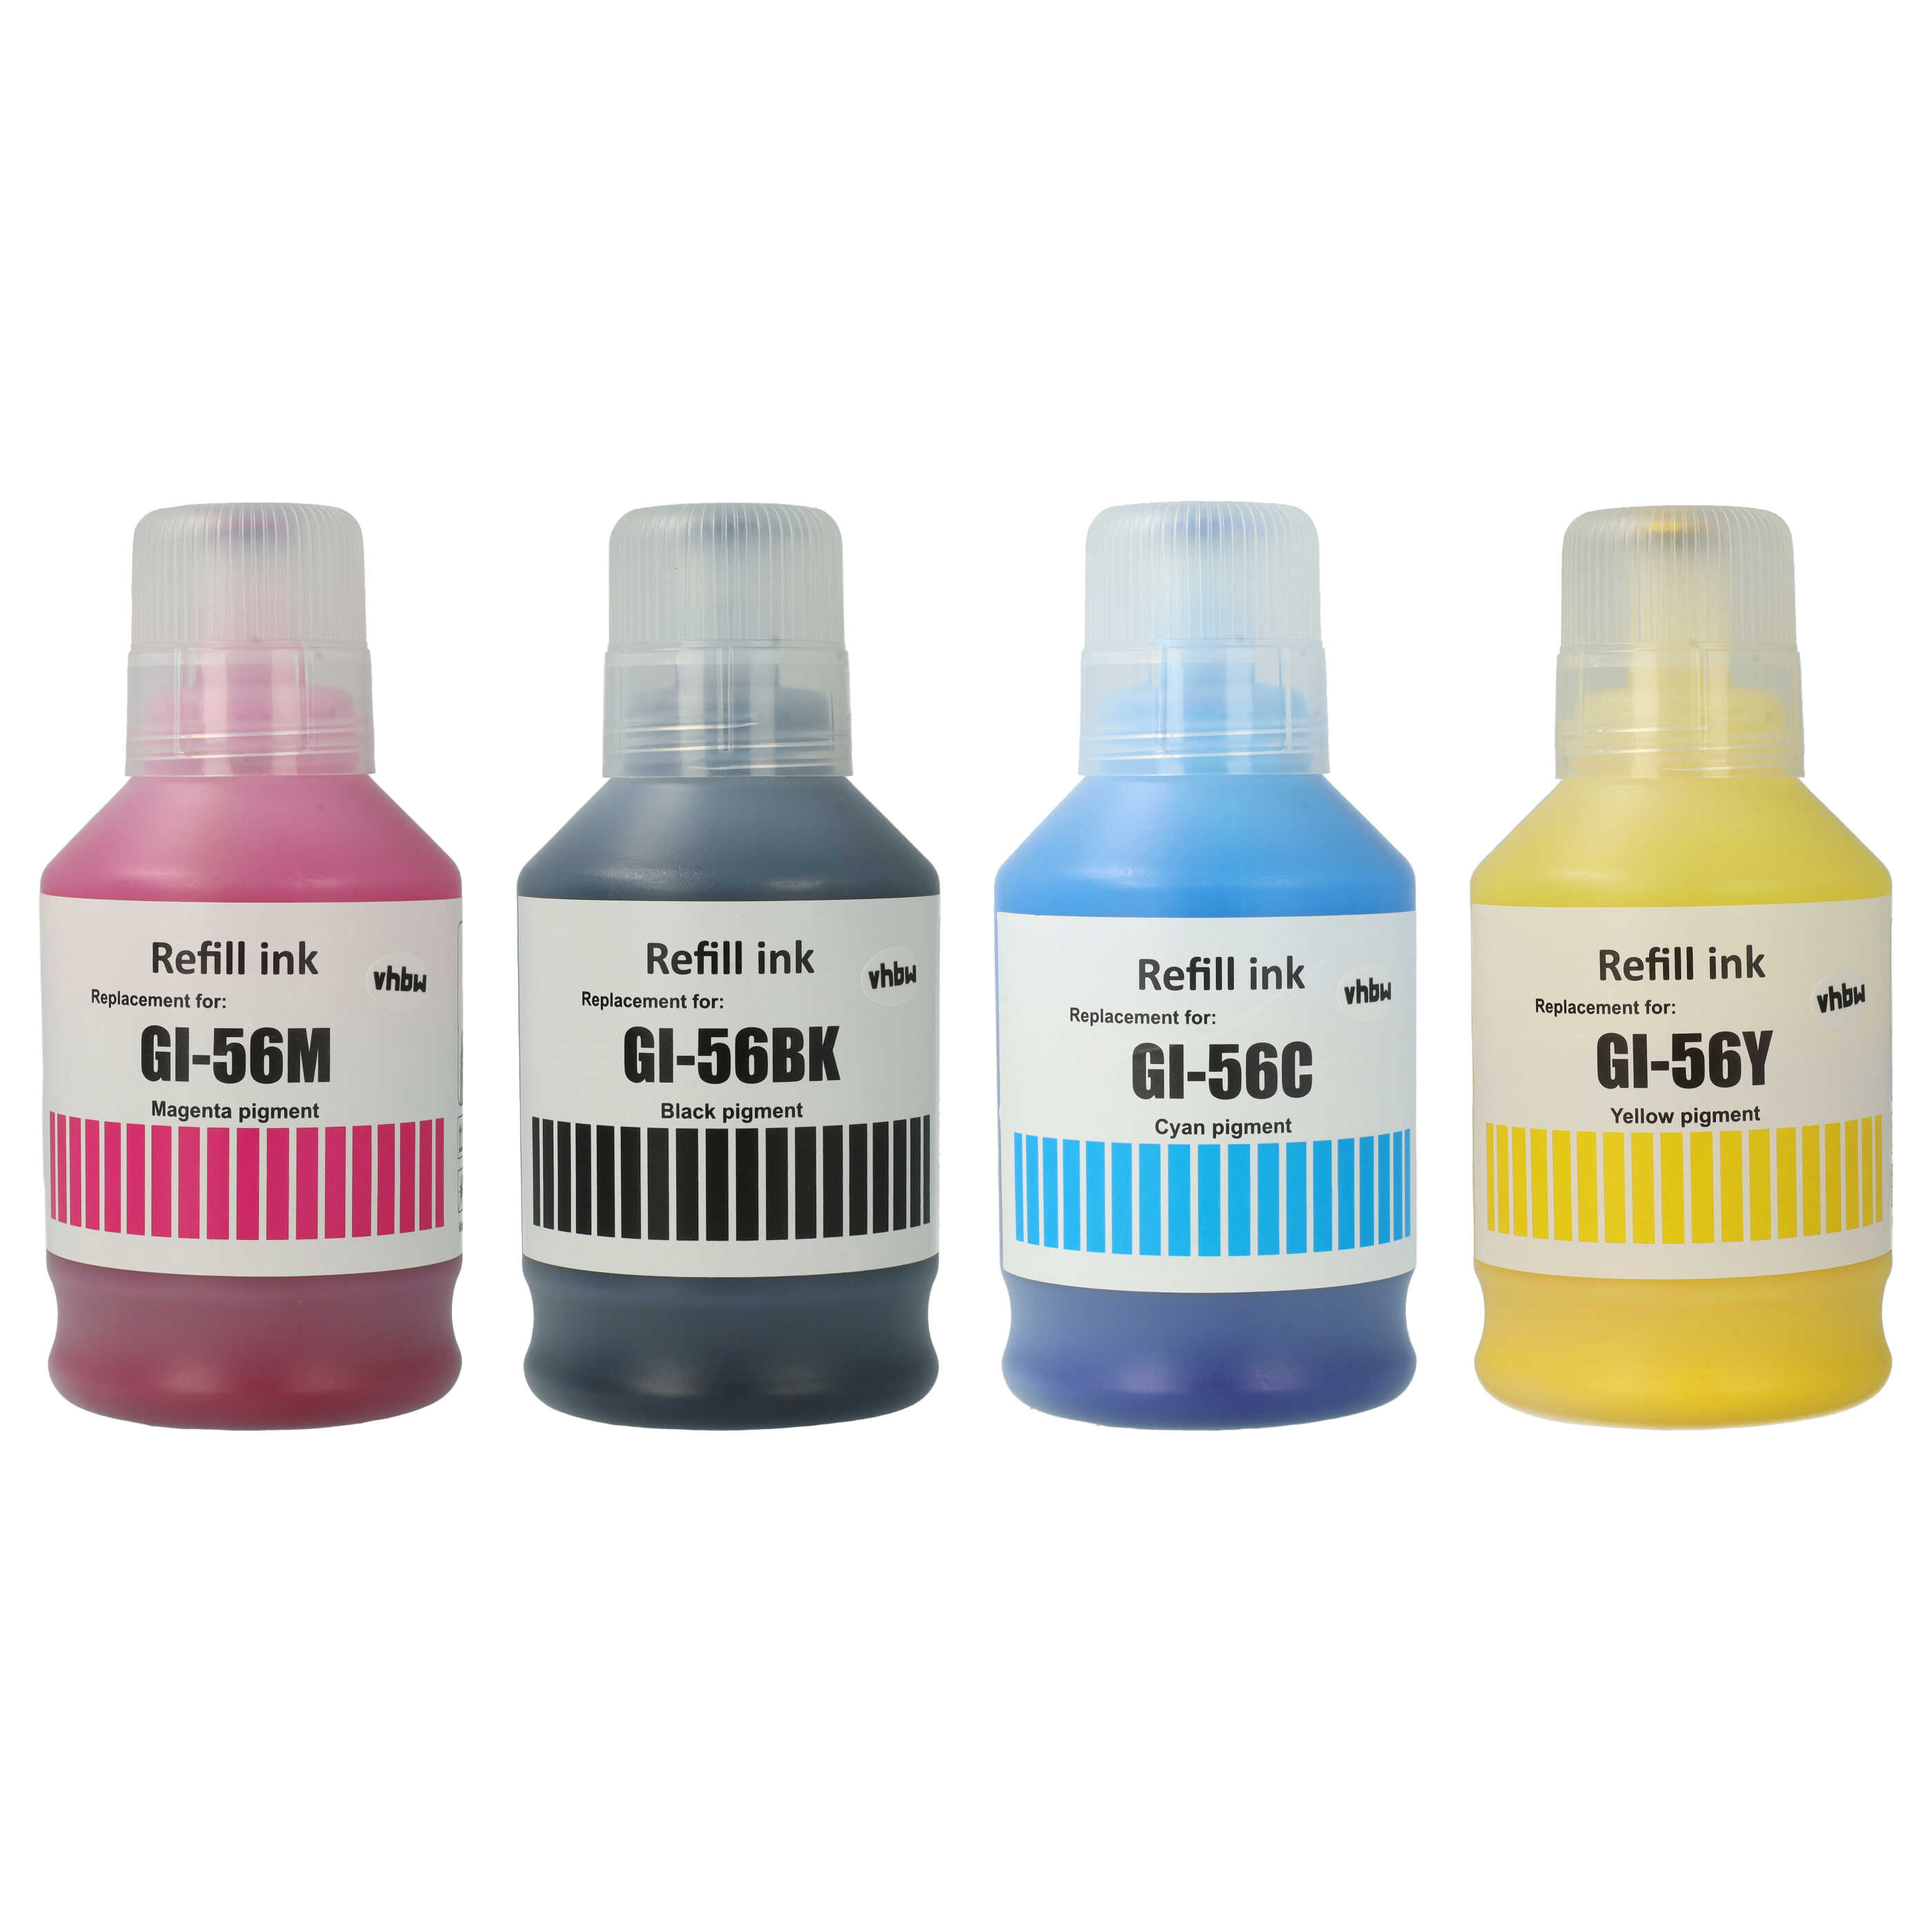 4x Refill Ink Coloured replaces Canon 4412C001, 4431C001, 4430C001, 4432C001 for Canon Printer - Pigmented